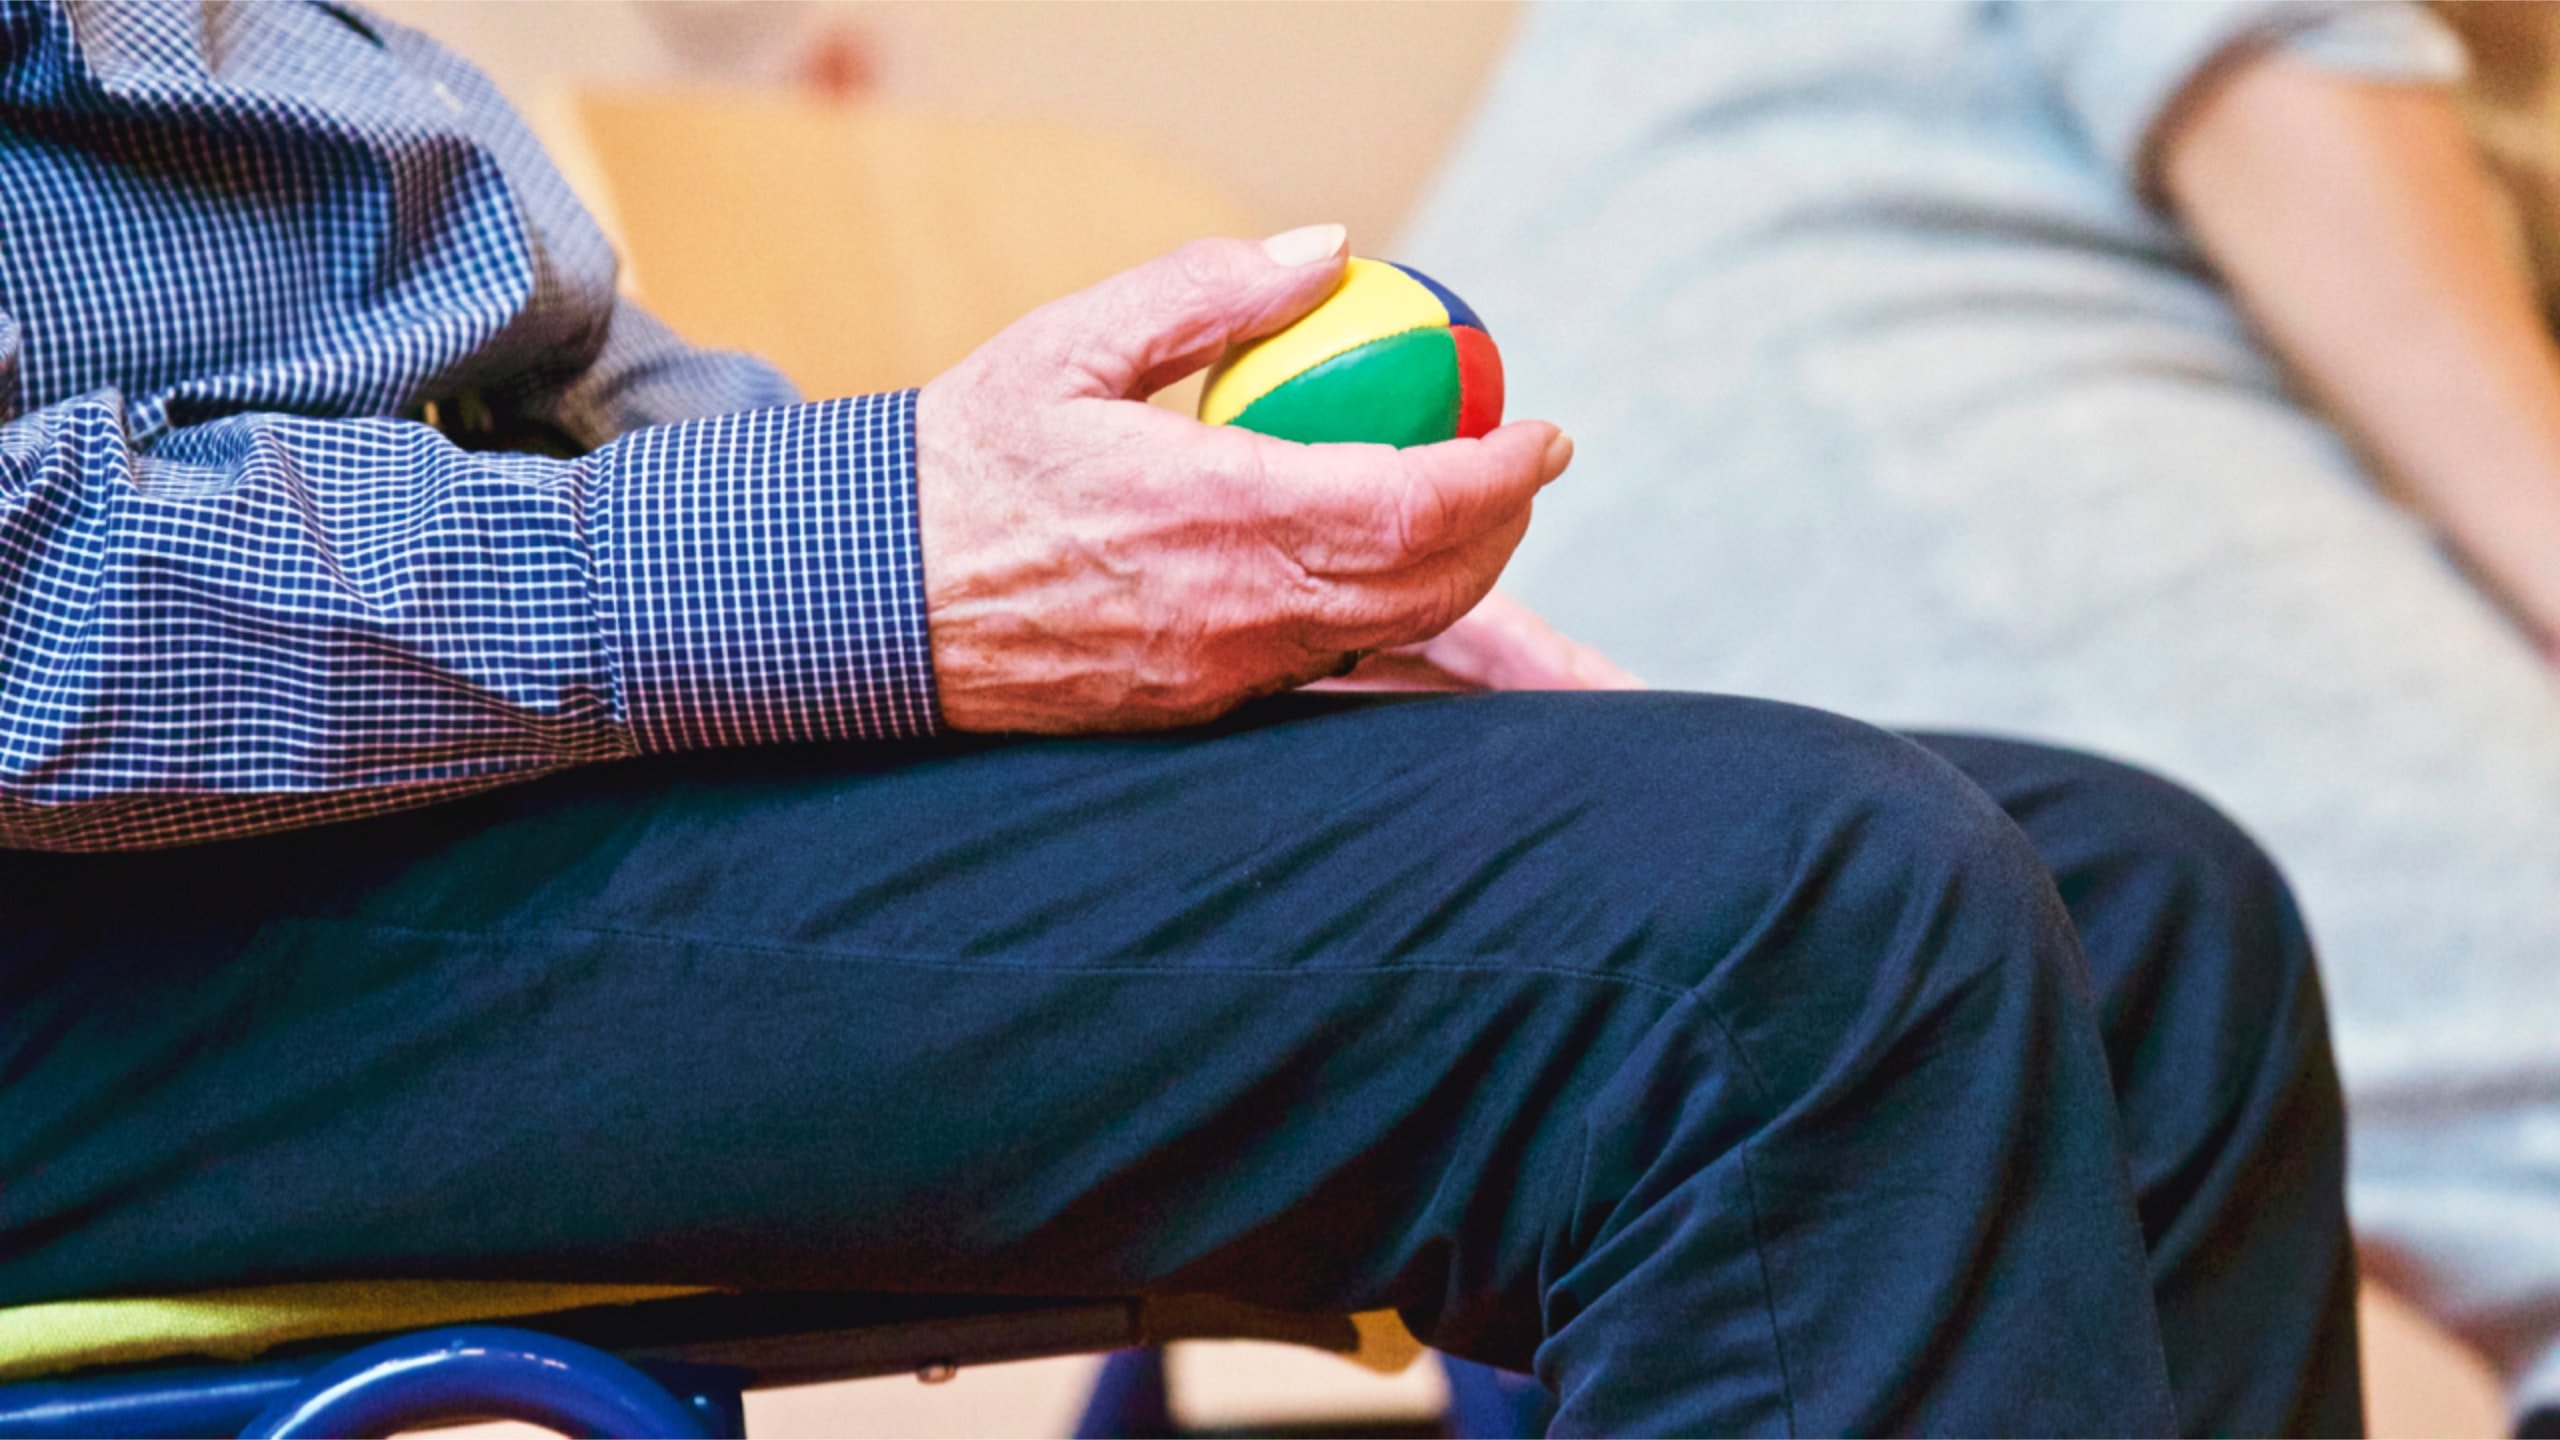 Providing the Best Care with Occupational Therapy